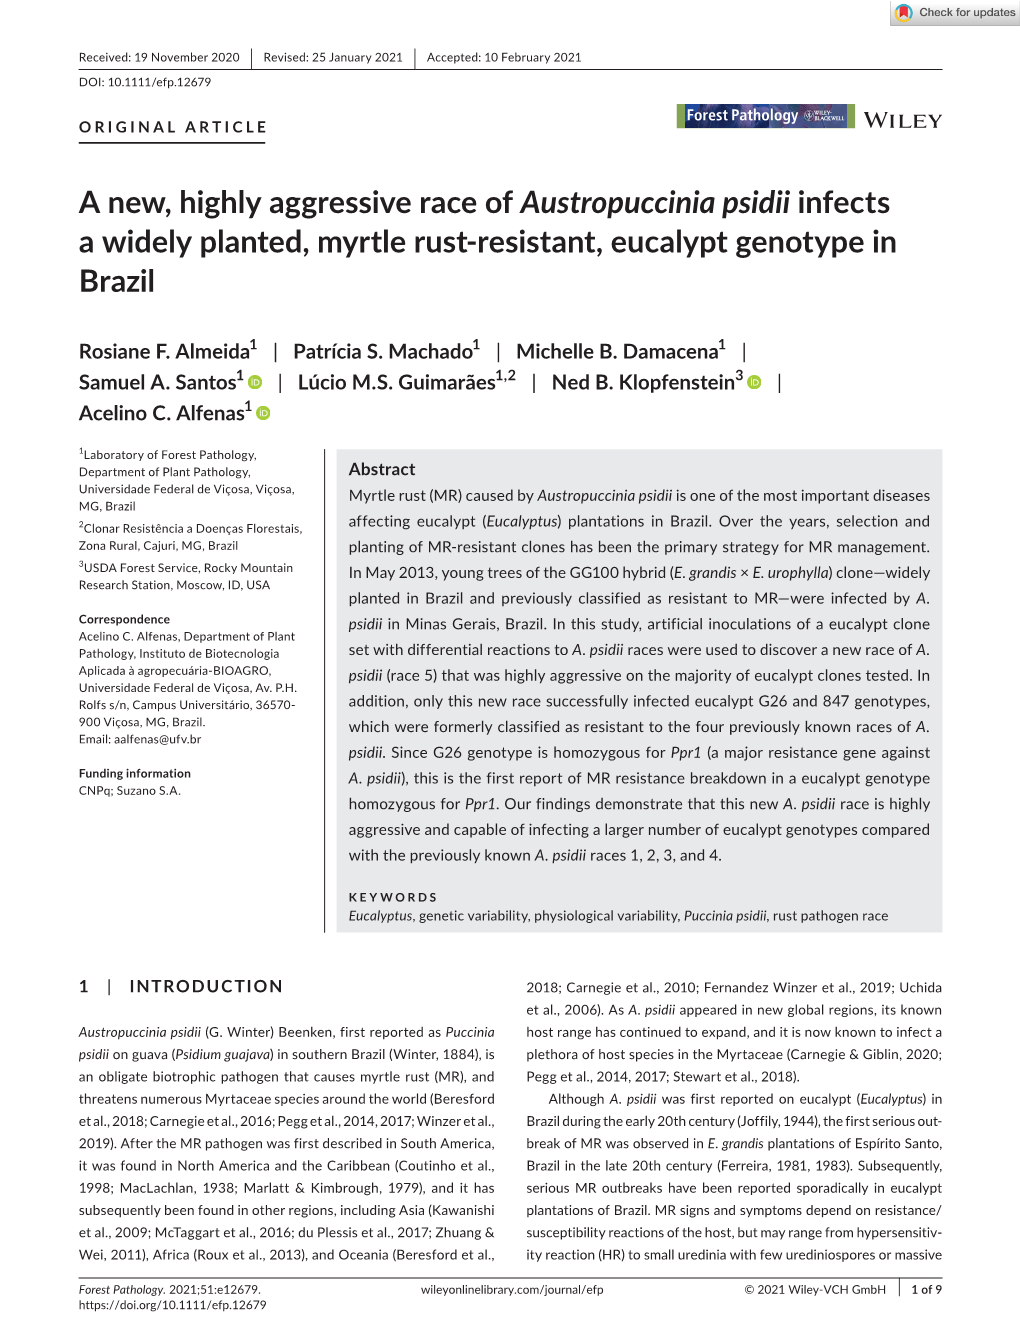 A New, Highly Aggressive Race of Austropuccinia Psidii Infects a Widely Planted, Myrtle Rust-­Resistant, Eucalypt Genotype in Brazil